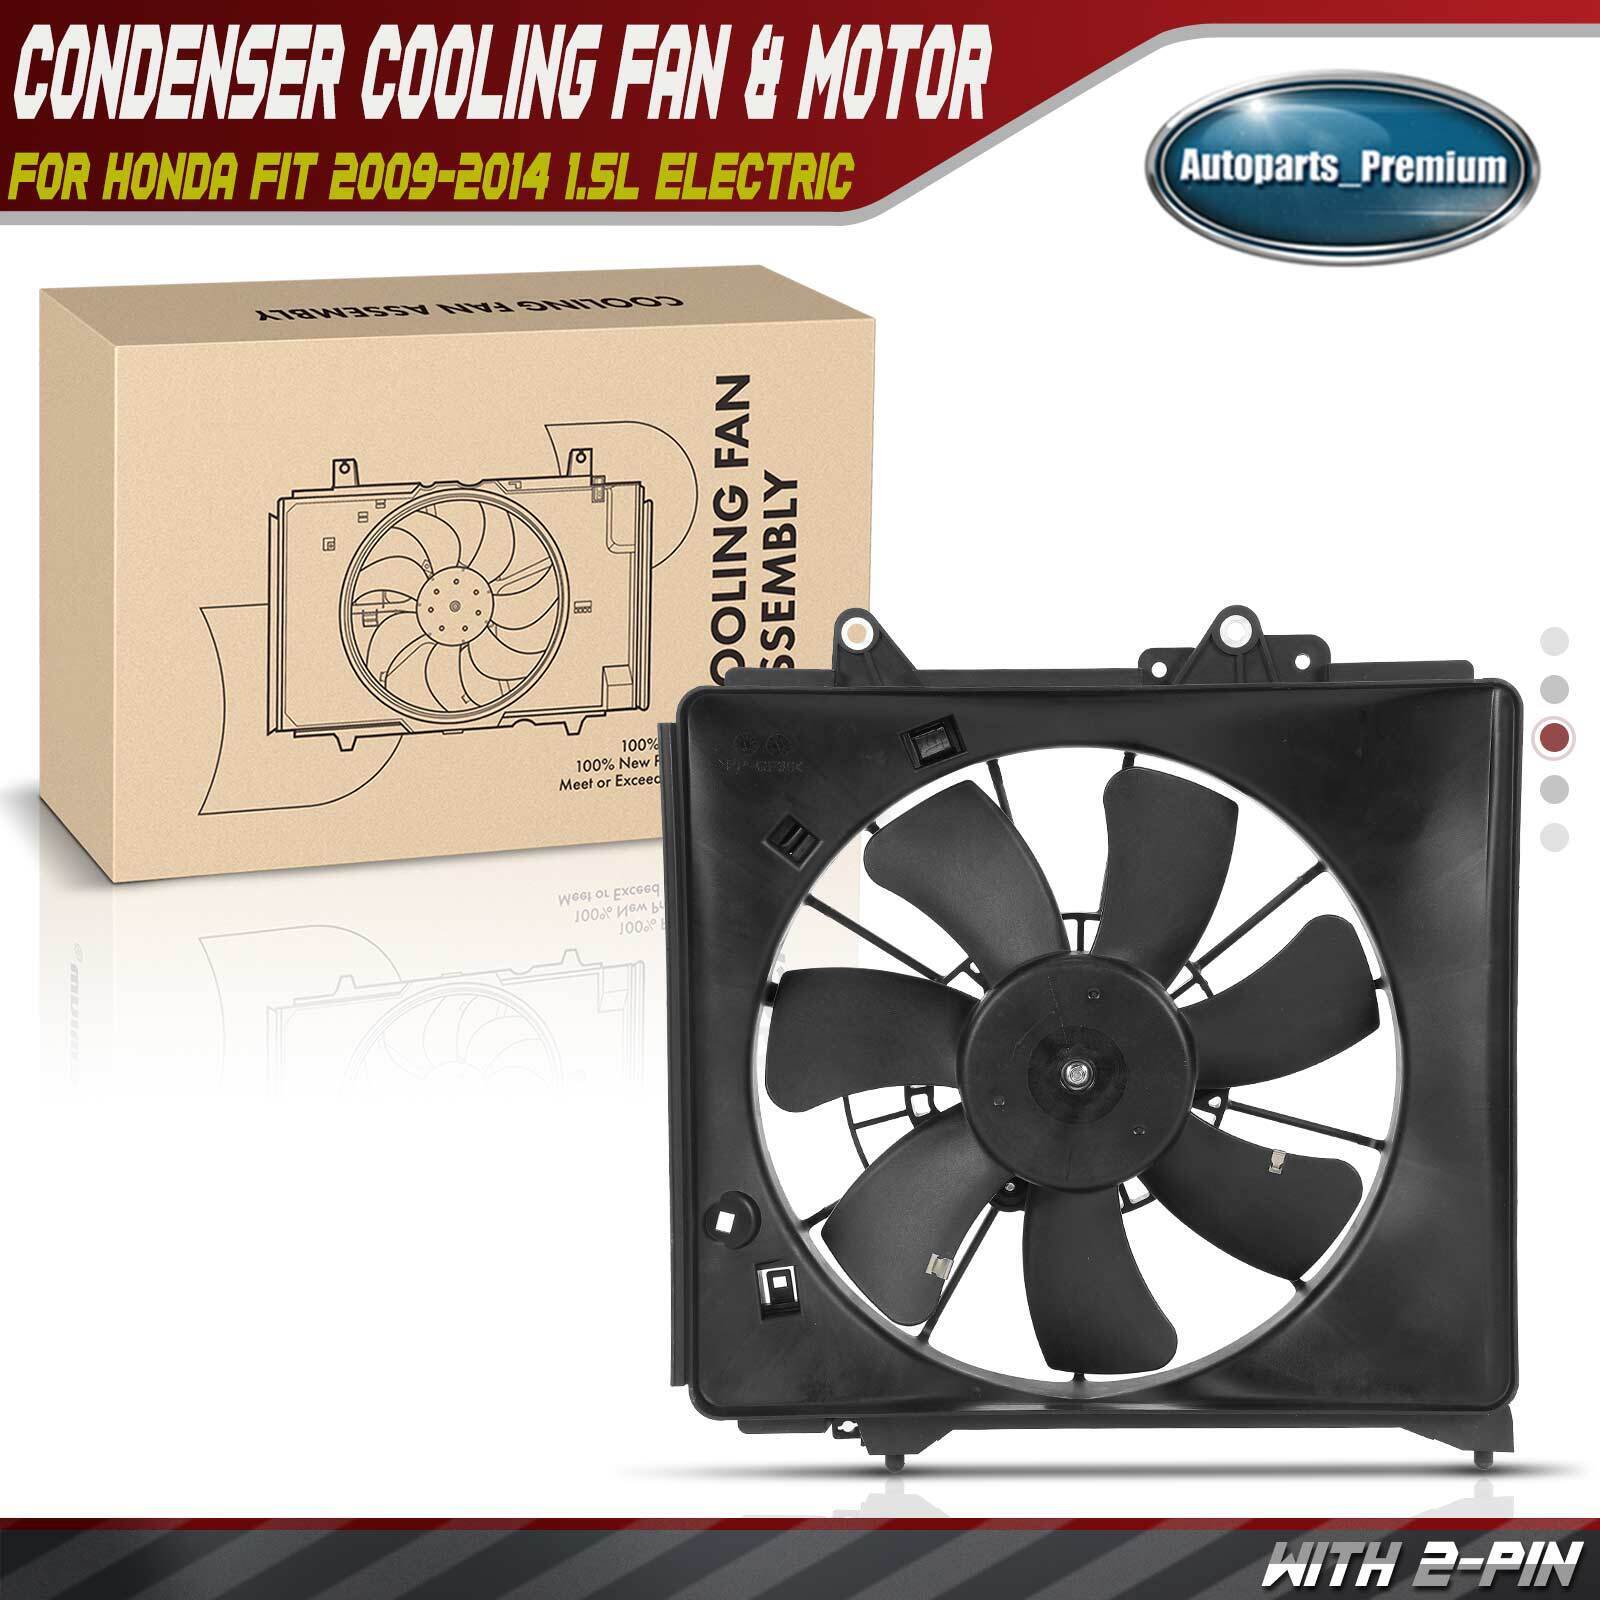 A/C Condenser Fan w/ Shroud Assembly for Honda Fit 2009-2013 2014 1.5L Electric